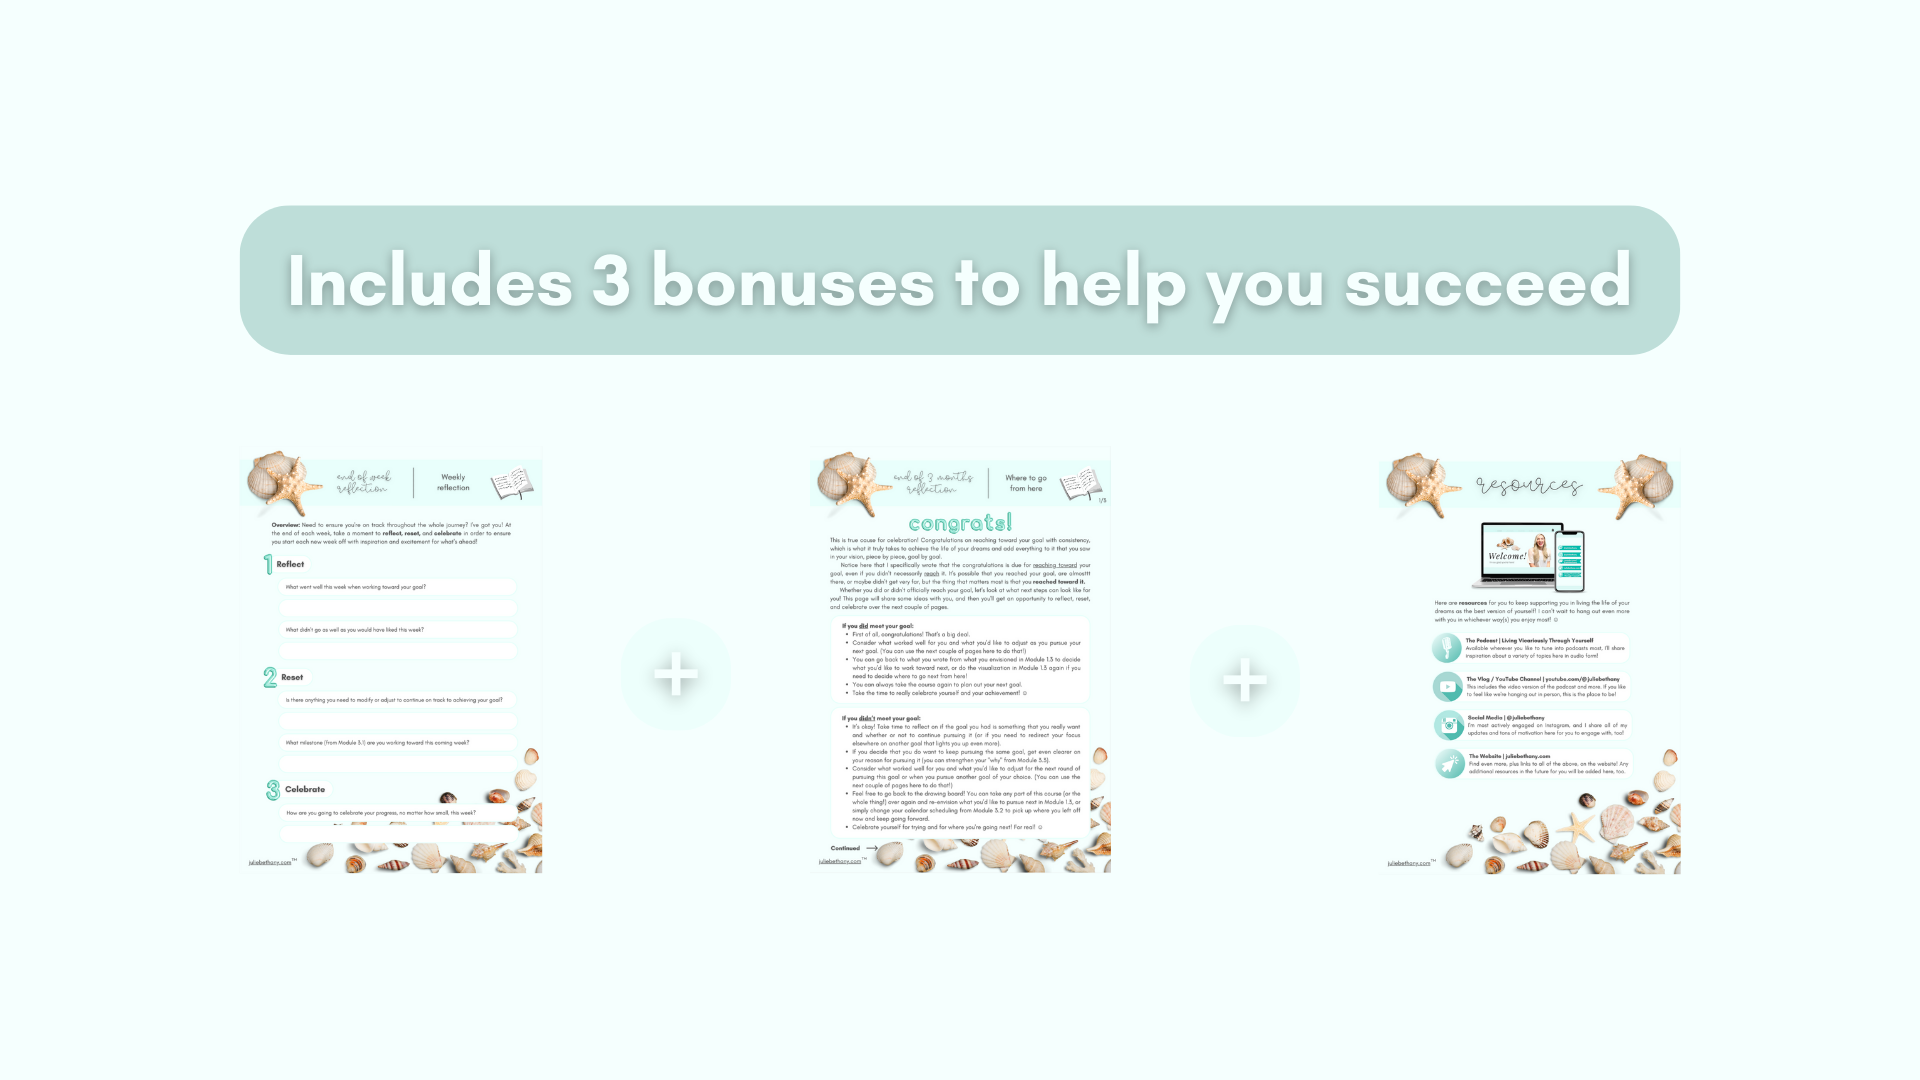 Includes 3 bonuses to help you succeed